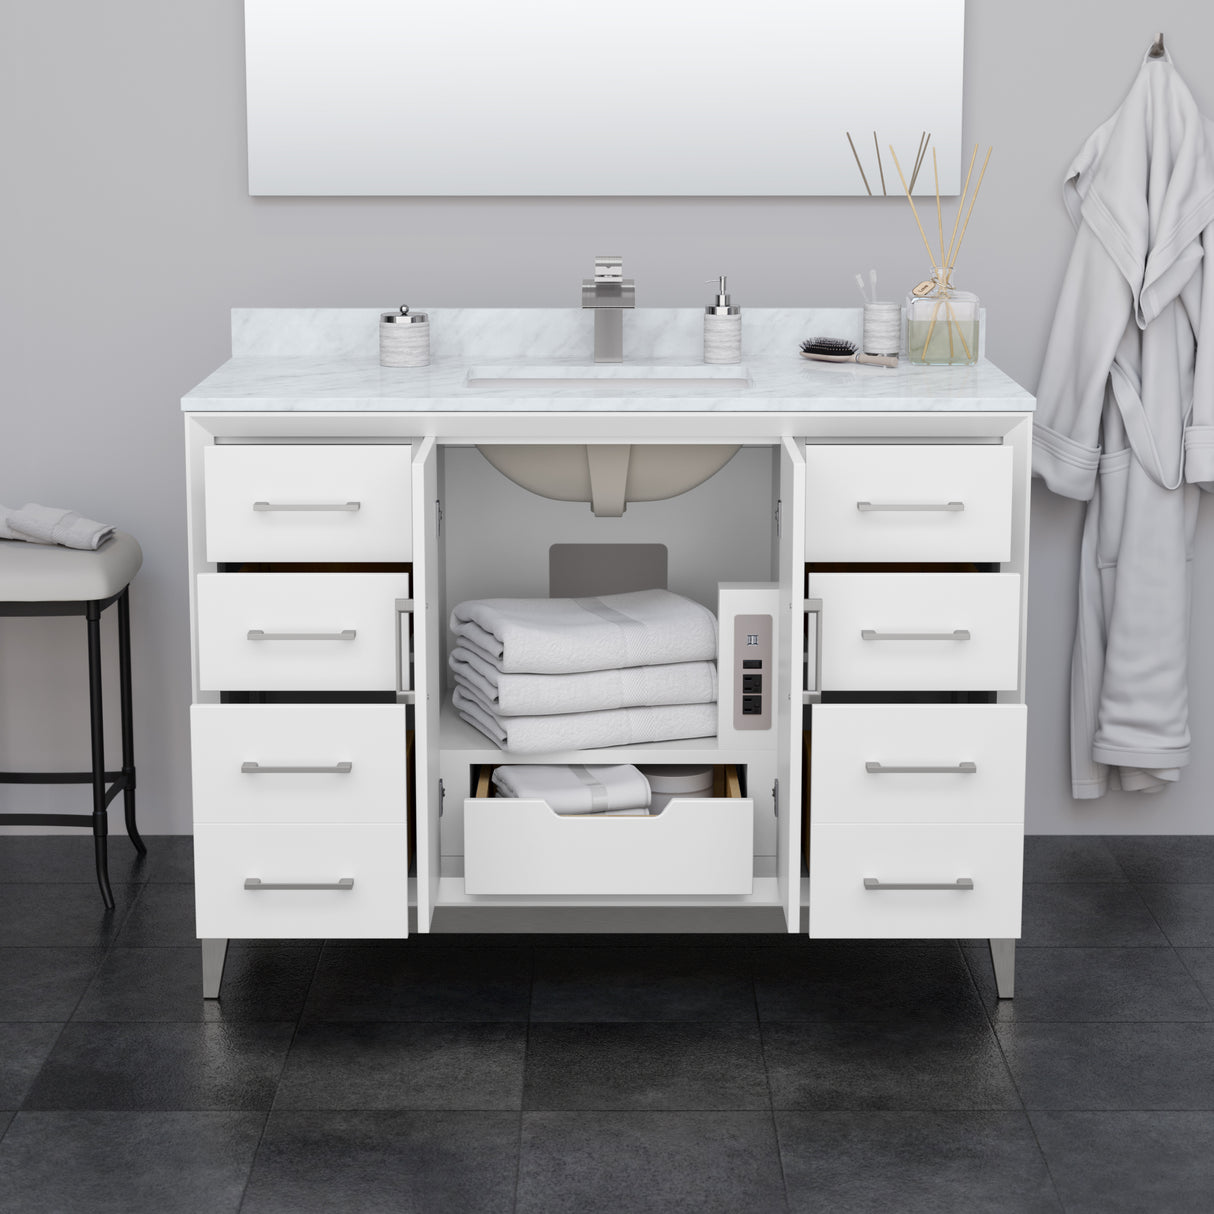 Amici 48 Inch Single Bathroom Vanity in White White Cultured Marble Countertop Undermount Square Sink Brushed Nickel Trim